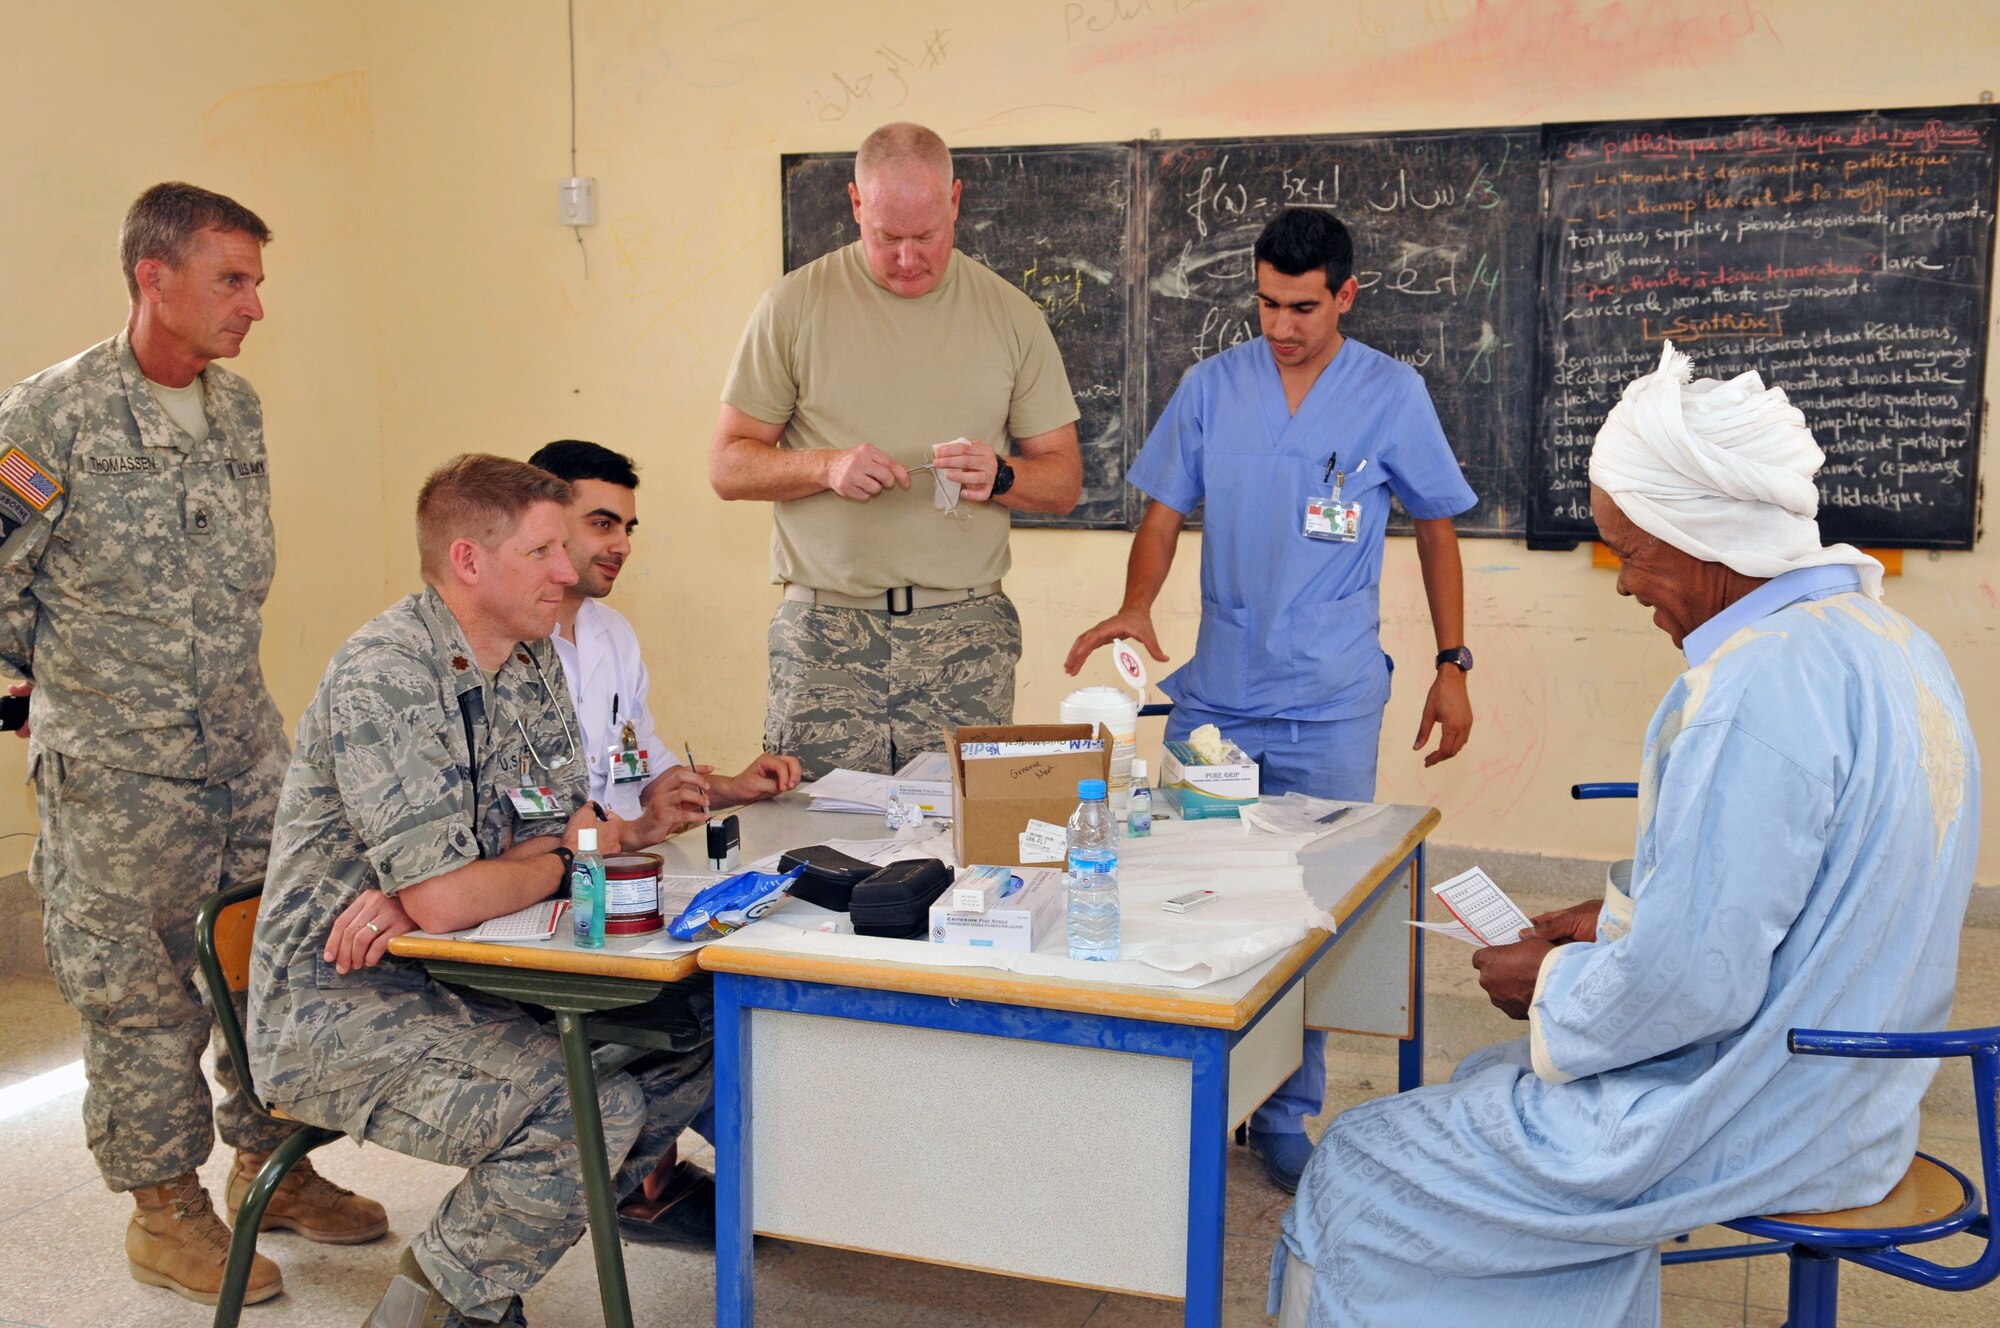 U.S. Air National Guard and Air Force Reserve personnel provide medical and dental care in conjunction with their Moroccan counterparts at Adis, Morocco, April 22, 2017. (U.S. Air National Guard photo by Tech. Sgt. Annie Edwards)